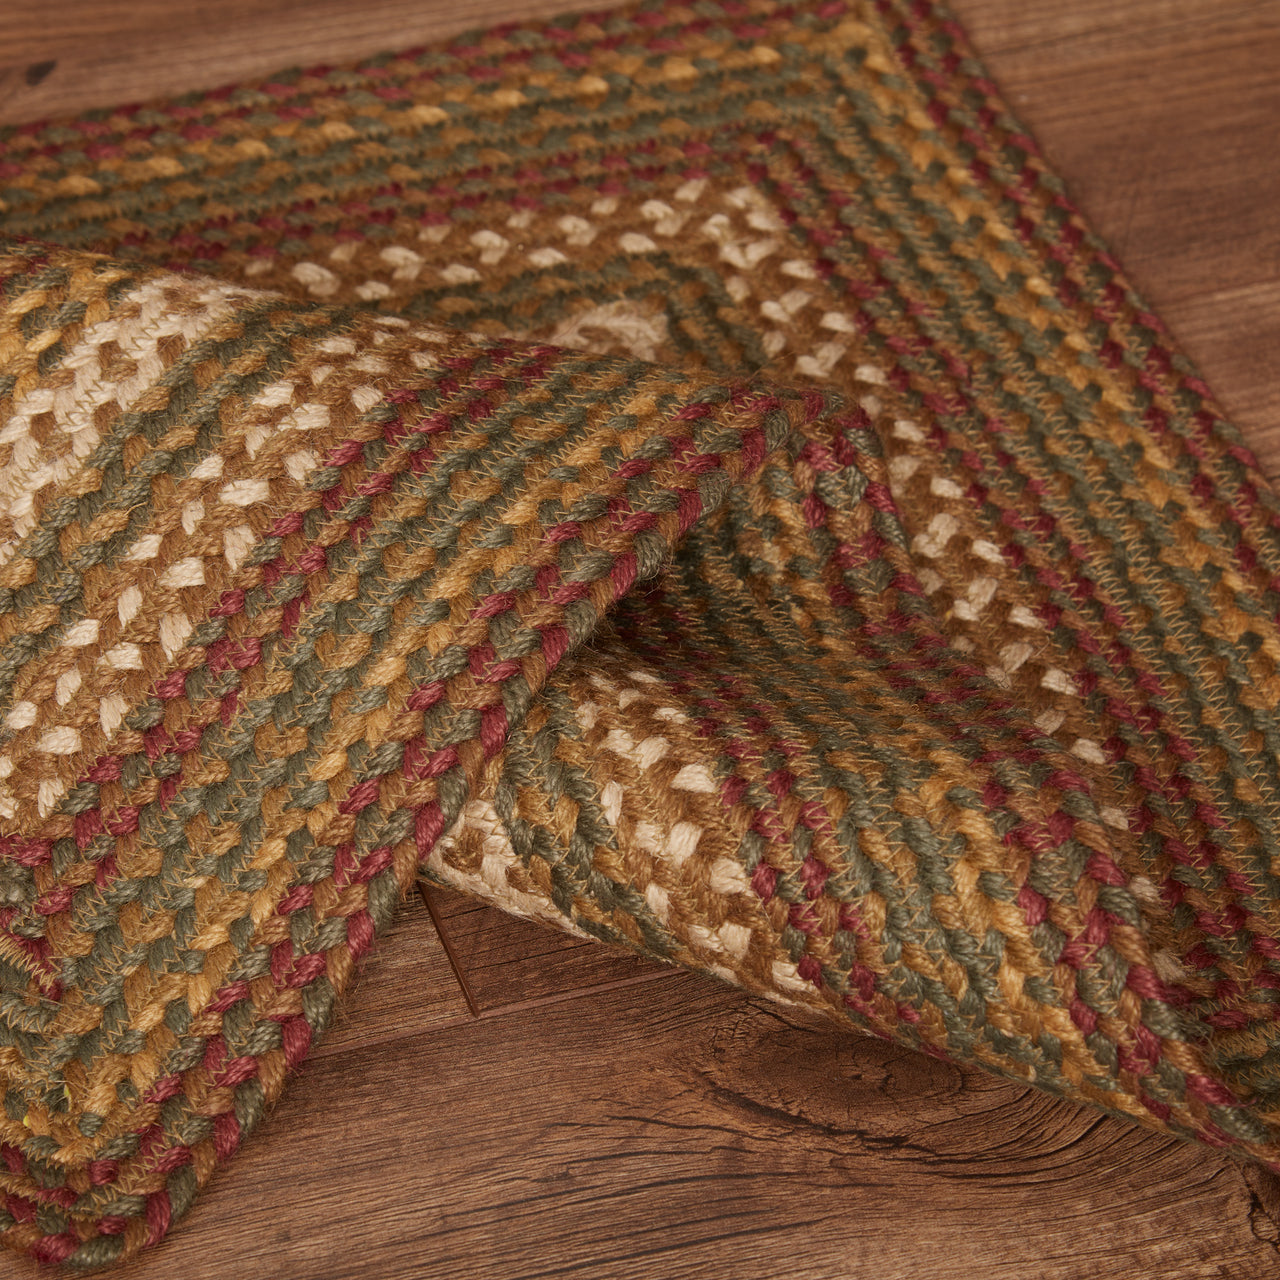 Tea Cabin Jute Braided Rug Rect 20"x30"with Rug Pad VHC Brands